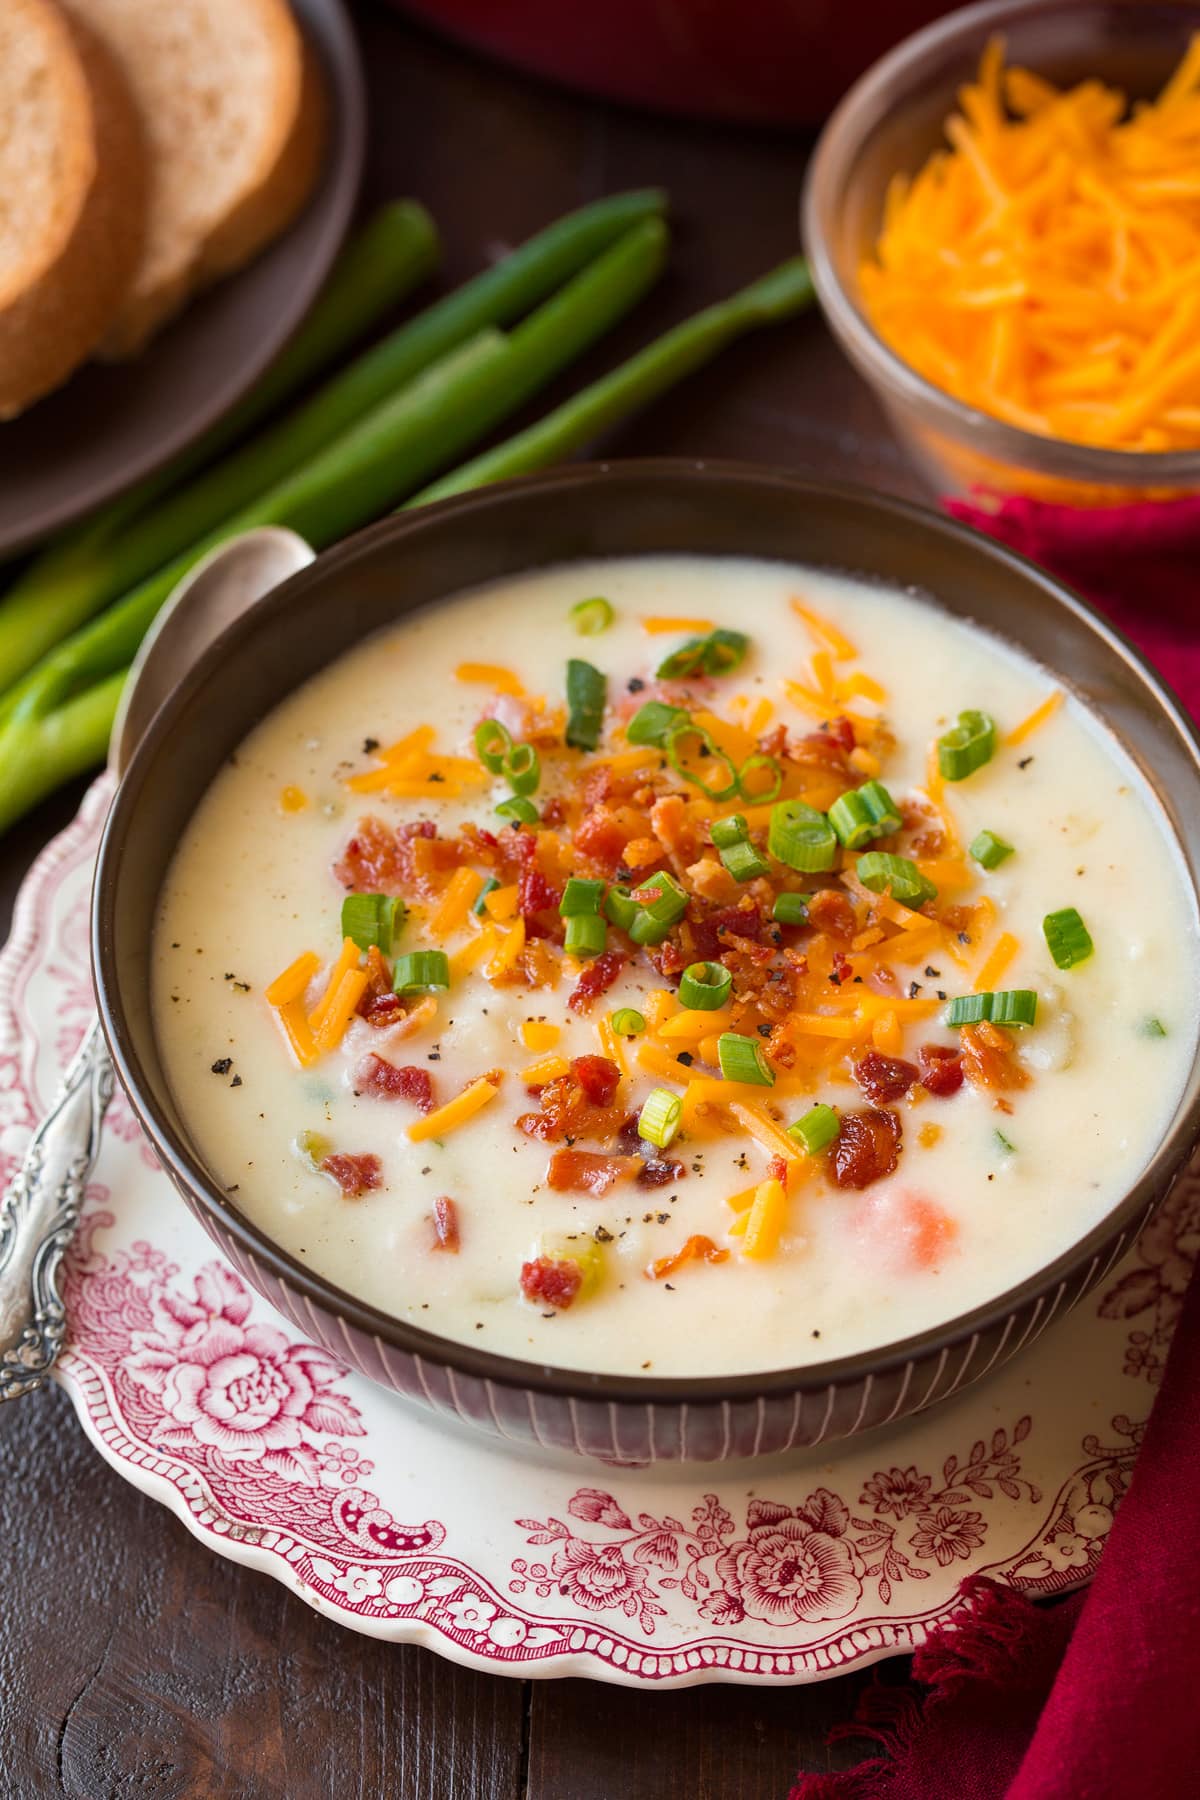 Photo: Serving of potato soup shown in a brown bowl set over a decorated white and red plate. Potato soup is garnished with cheddar, bacon and green onions. Wheat bread is shown as a serving suggestion.